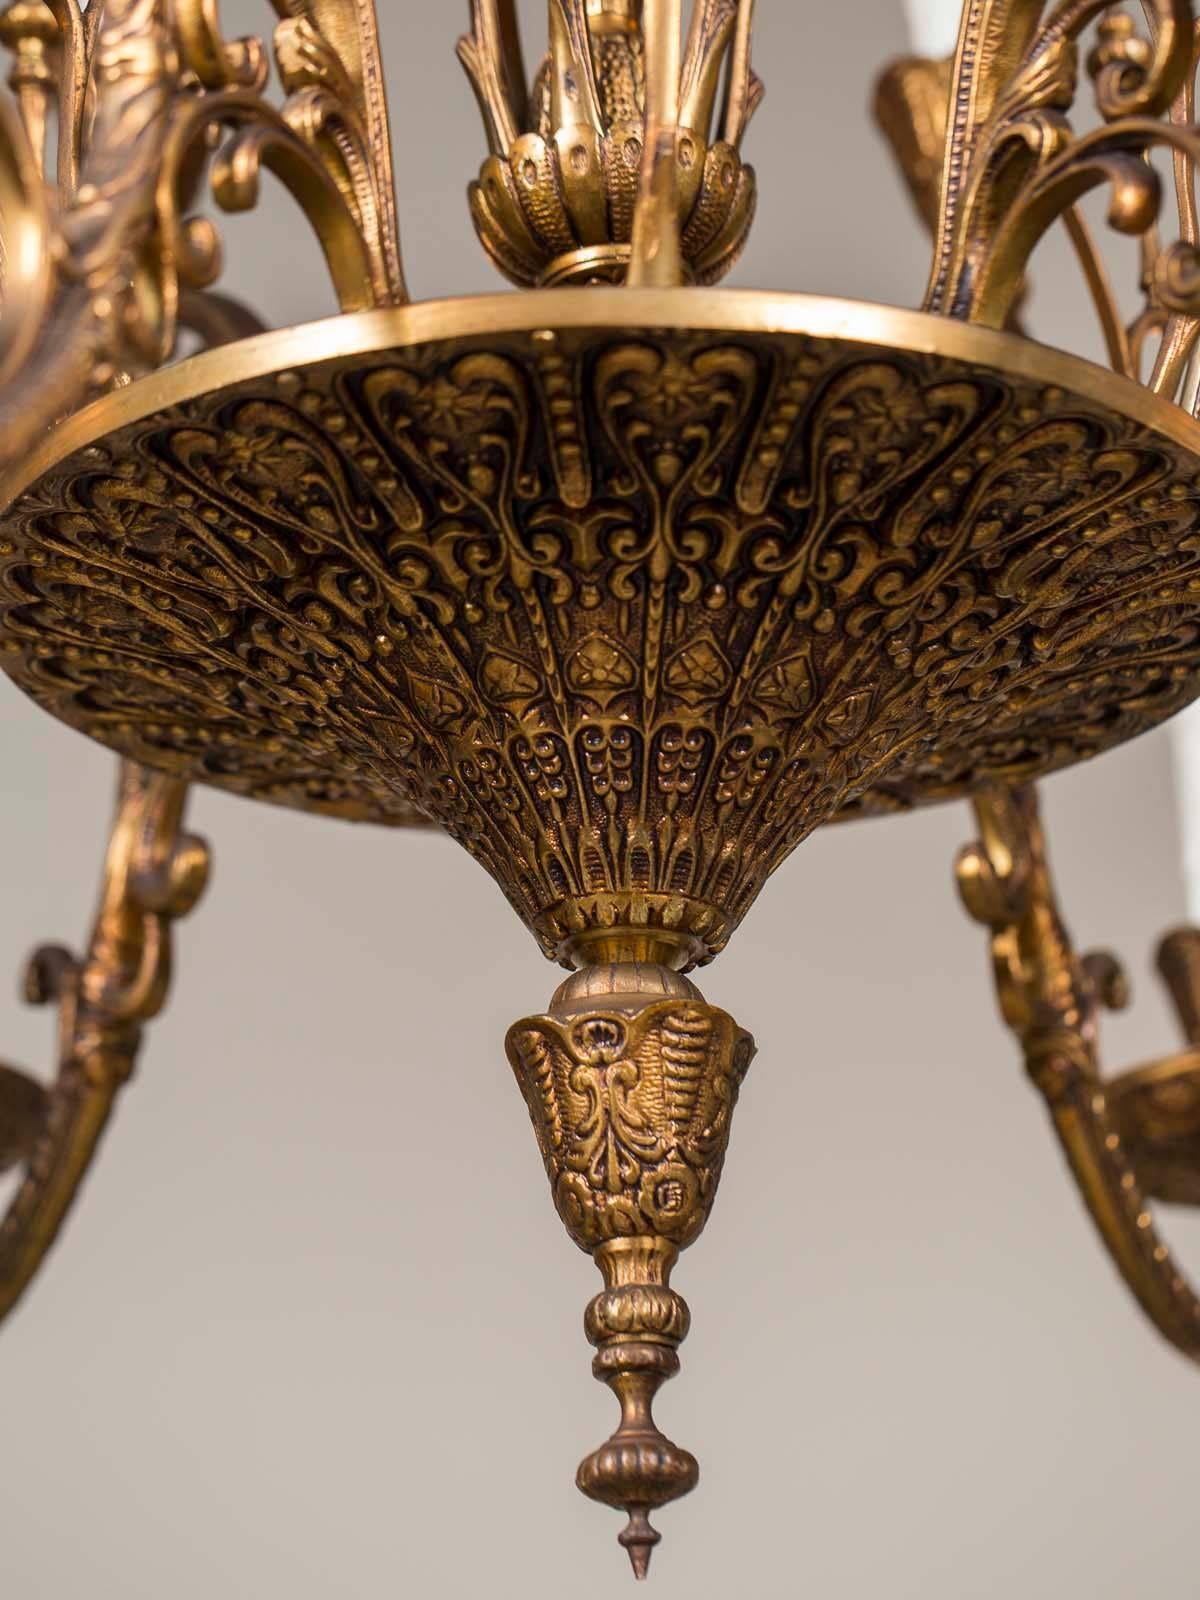 A vintage Italian Art Nouveau bronze two-tier chandelier having twelve lights from Italy, circa 1920. Notice the elongated silhouette of this Italian light fixture with six lights in the upper level and six lights in the lower level all arranged